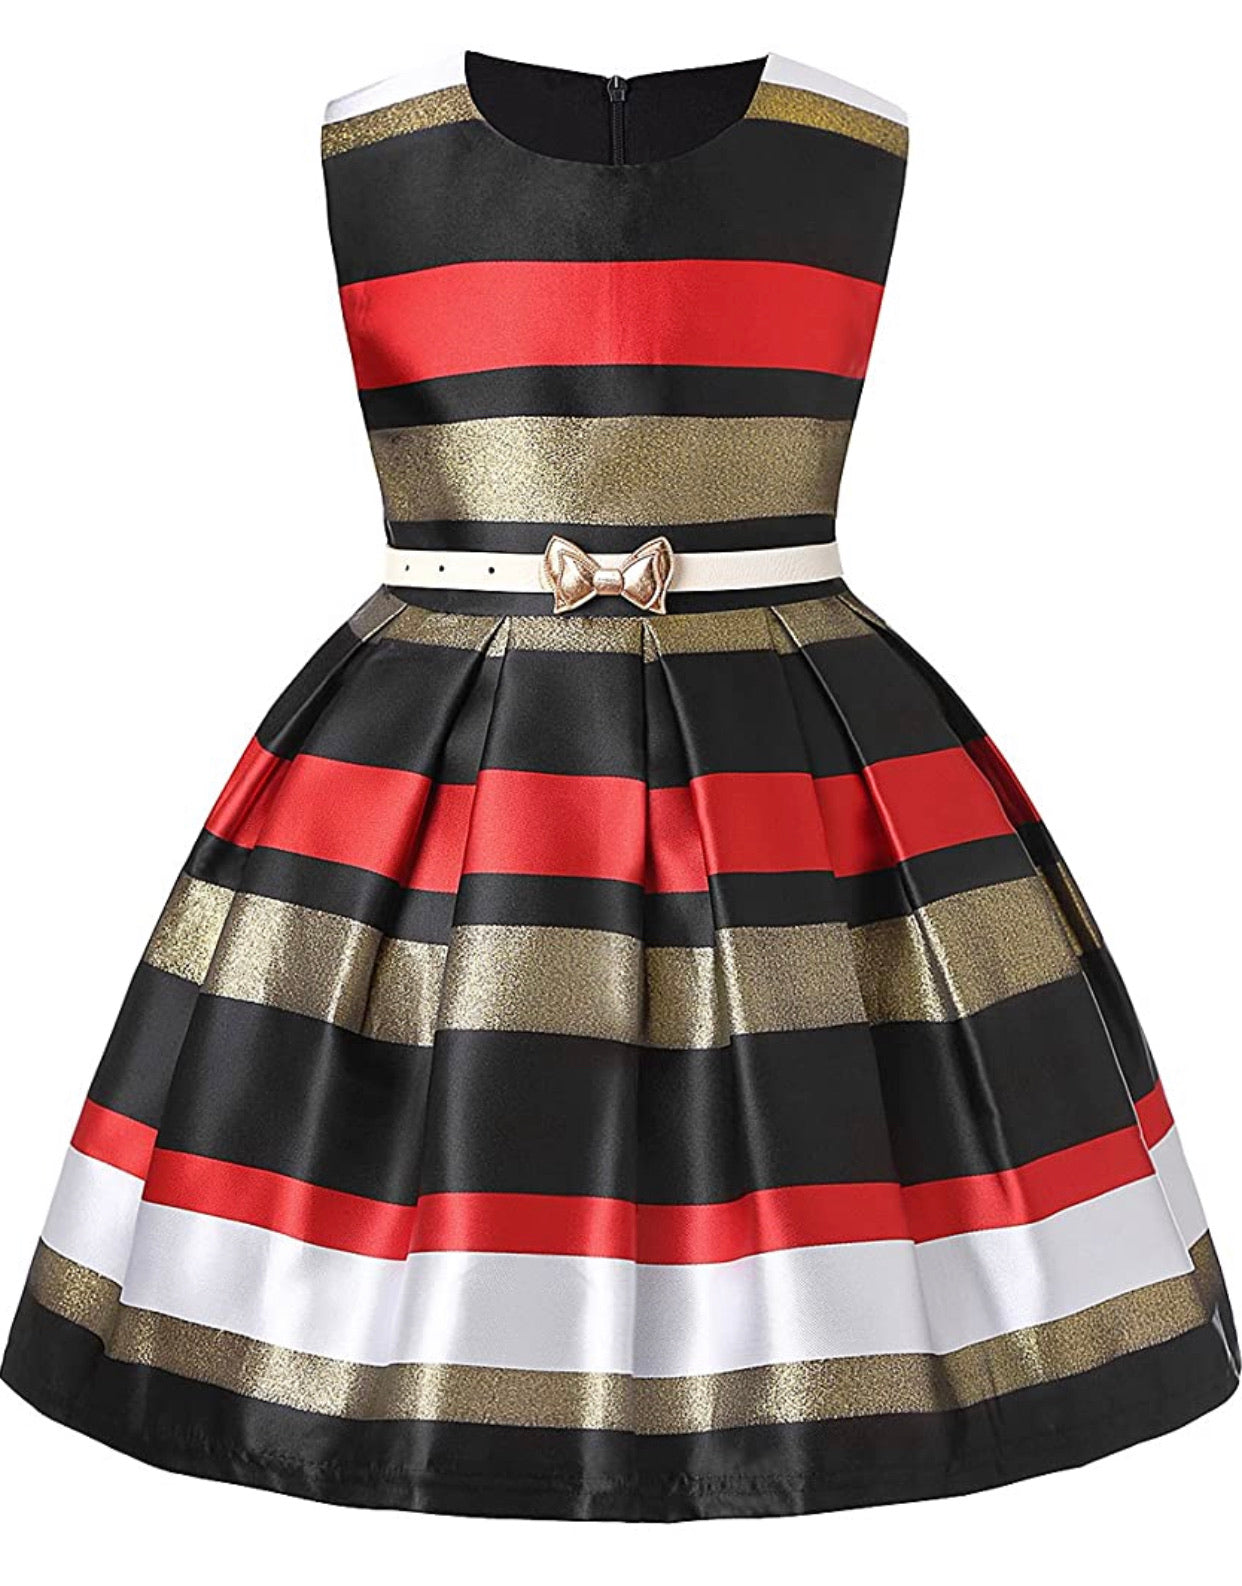 Little girl’s gold, red, and black Striped Party Dress, Sizes 2T - 14 years